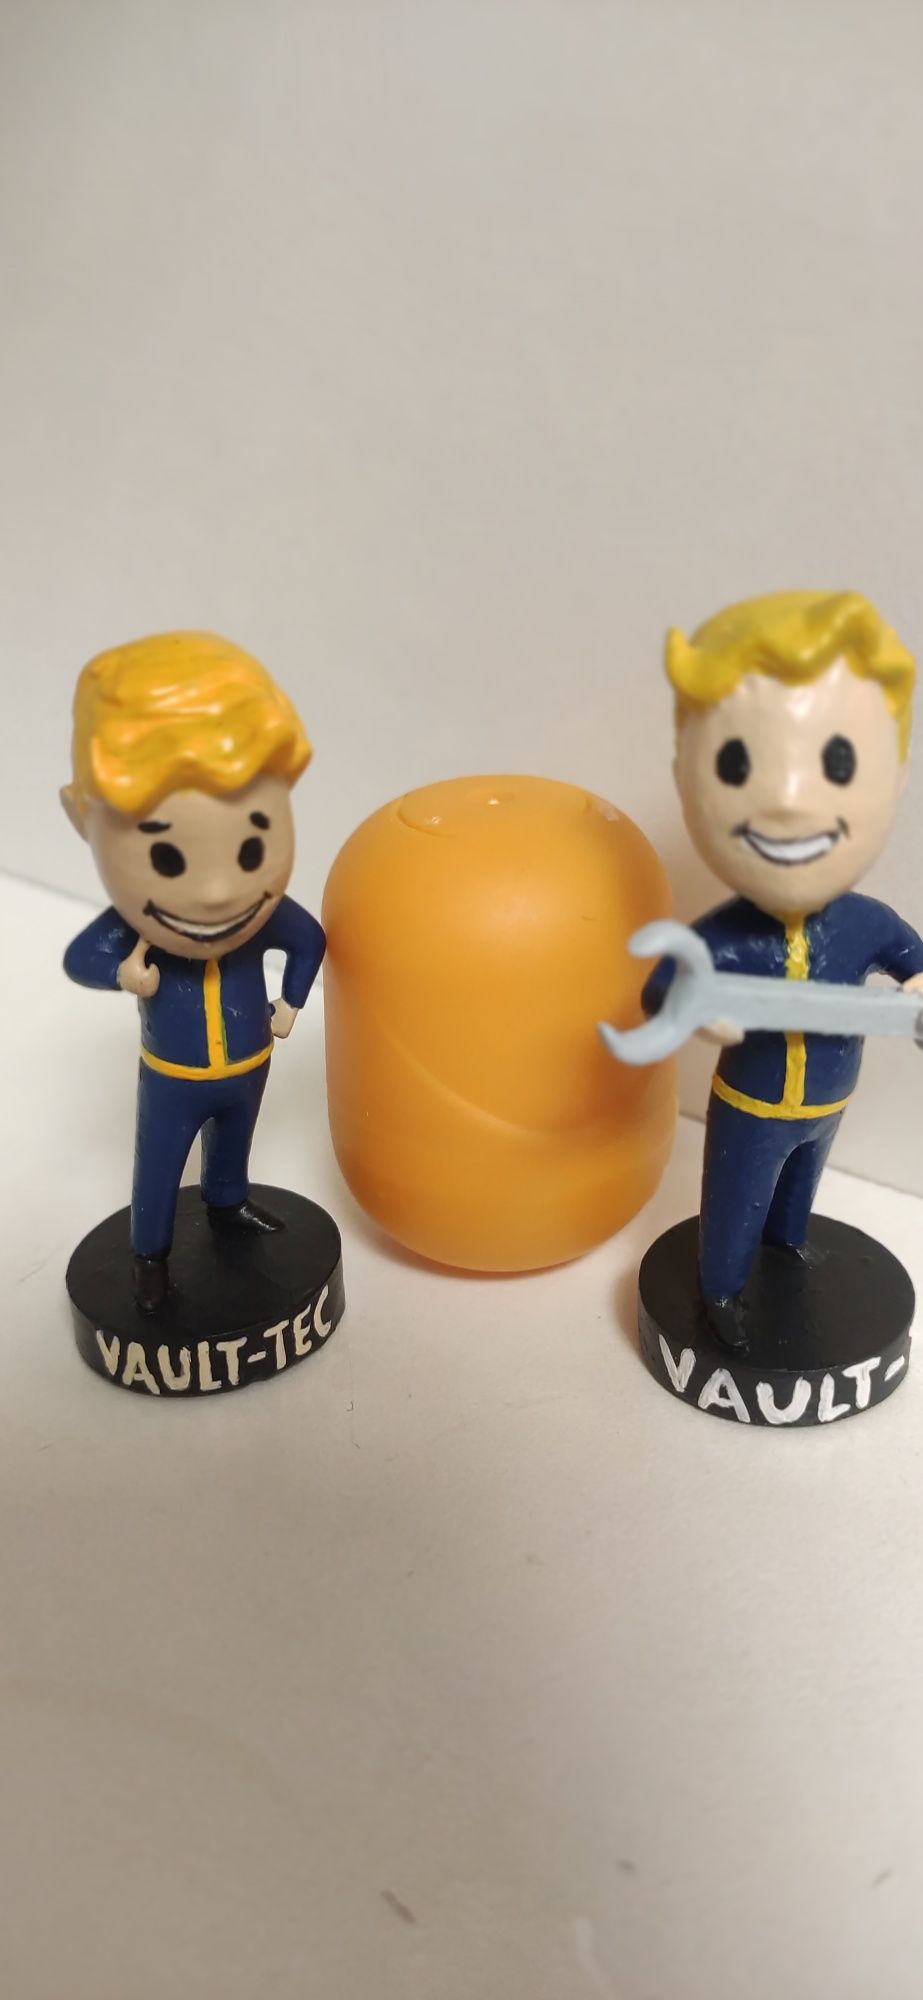 Vault Boy Фоллаут Fallout